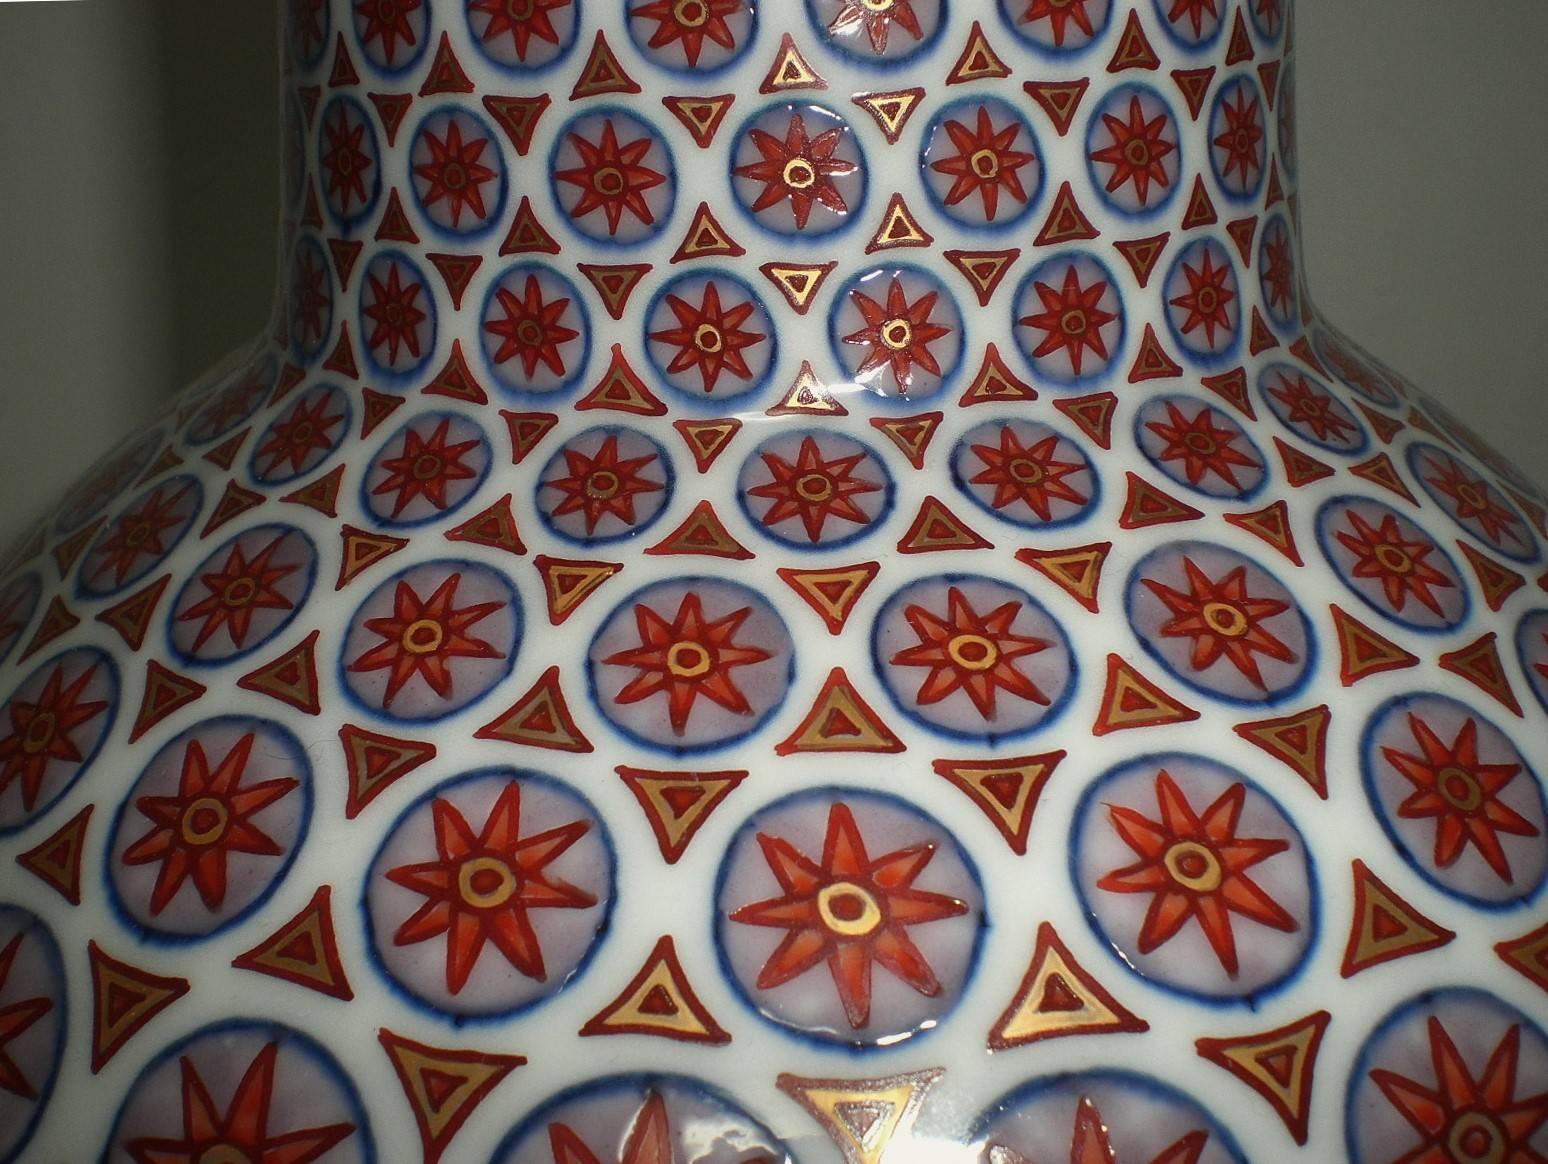 Extraordinary Japanese contemporary large decorative porcelain vase, intricately hand painted and gilded on a beautiful bottle shaped body in deep red, white and blue, a signed masterpiece by master porcelain artist of the Imari-Arita region of